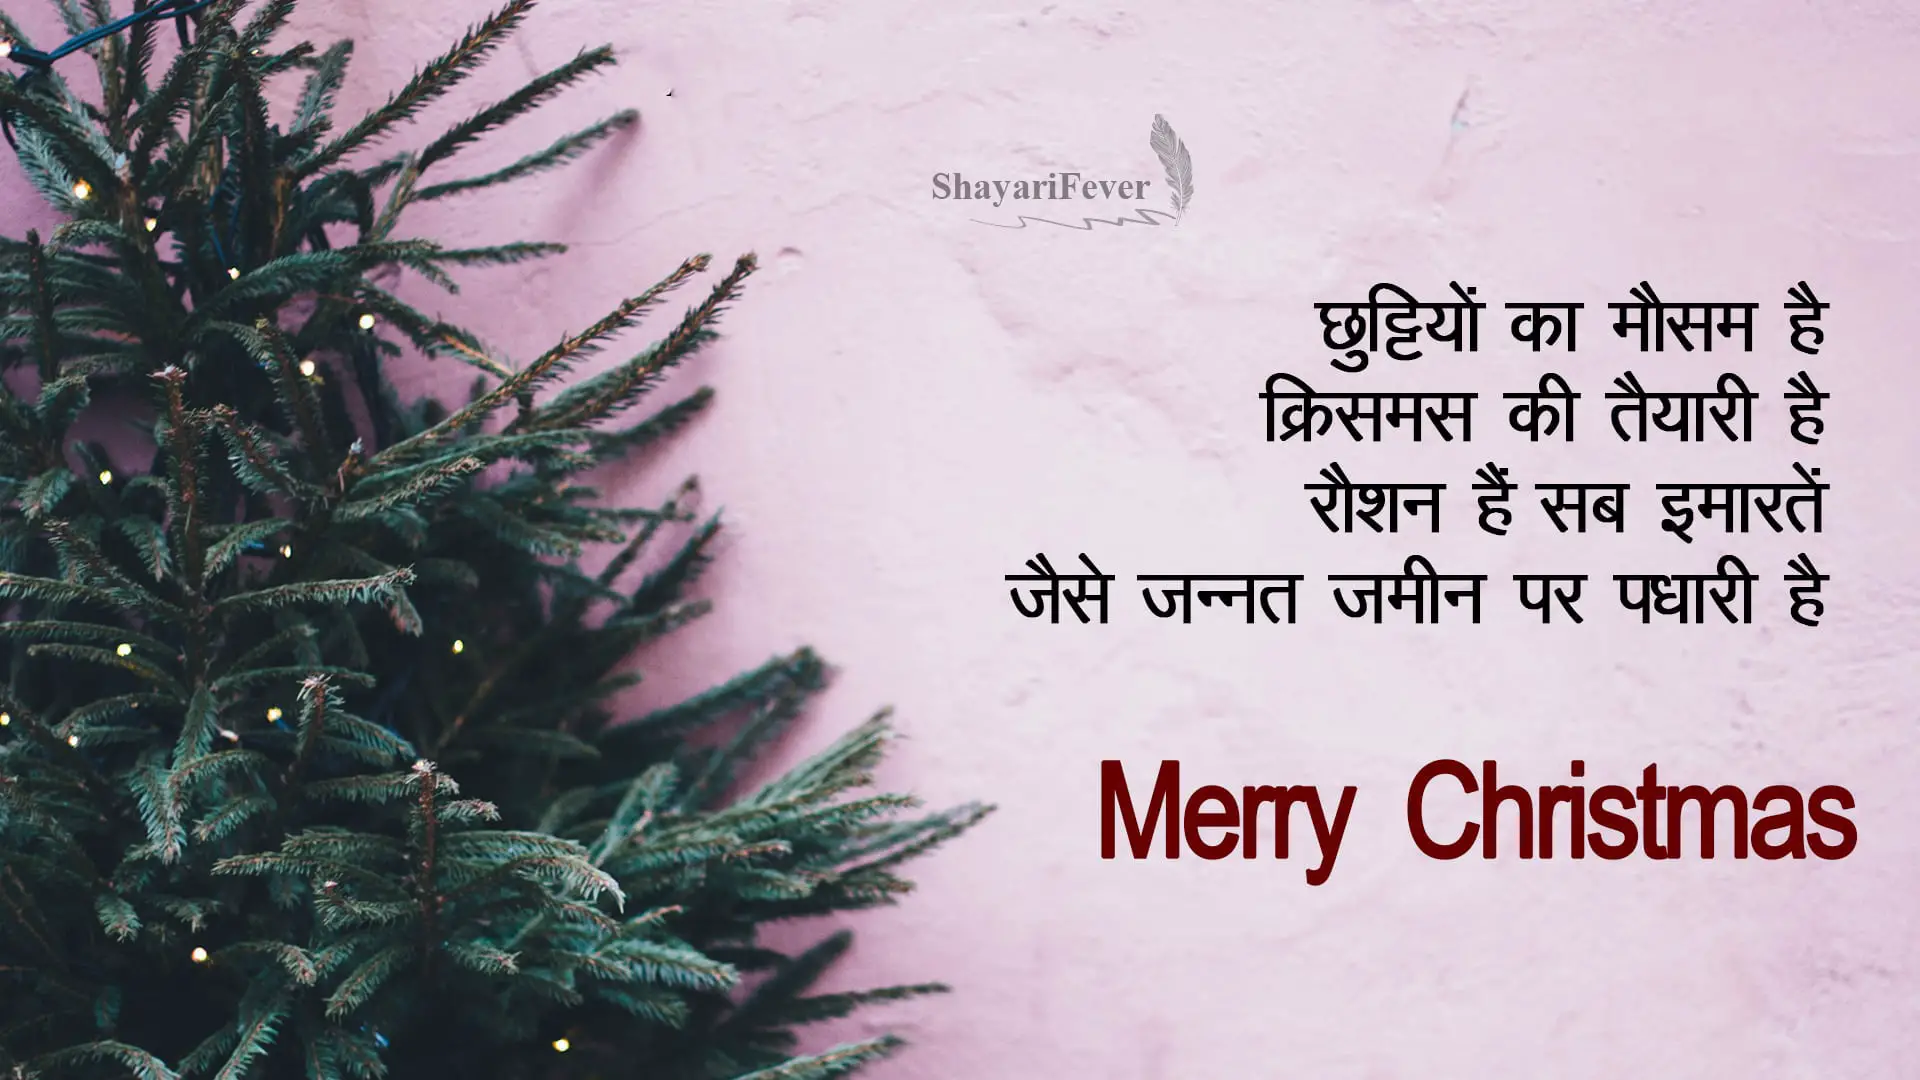 Merry Christmas Images In Hindi